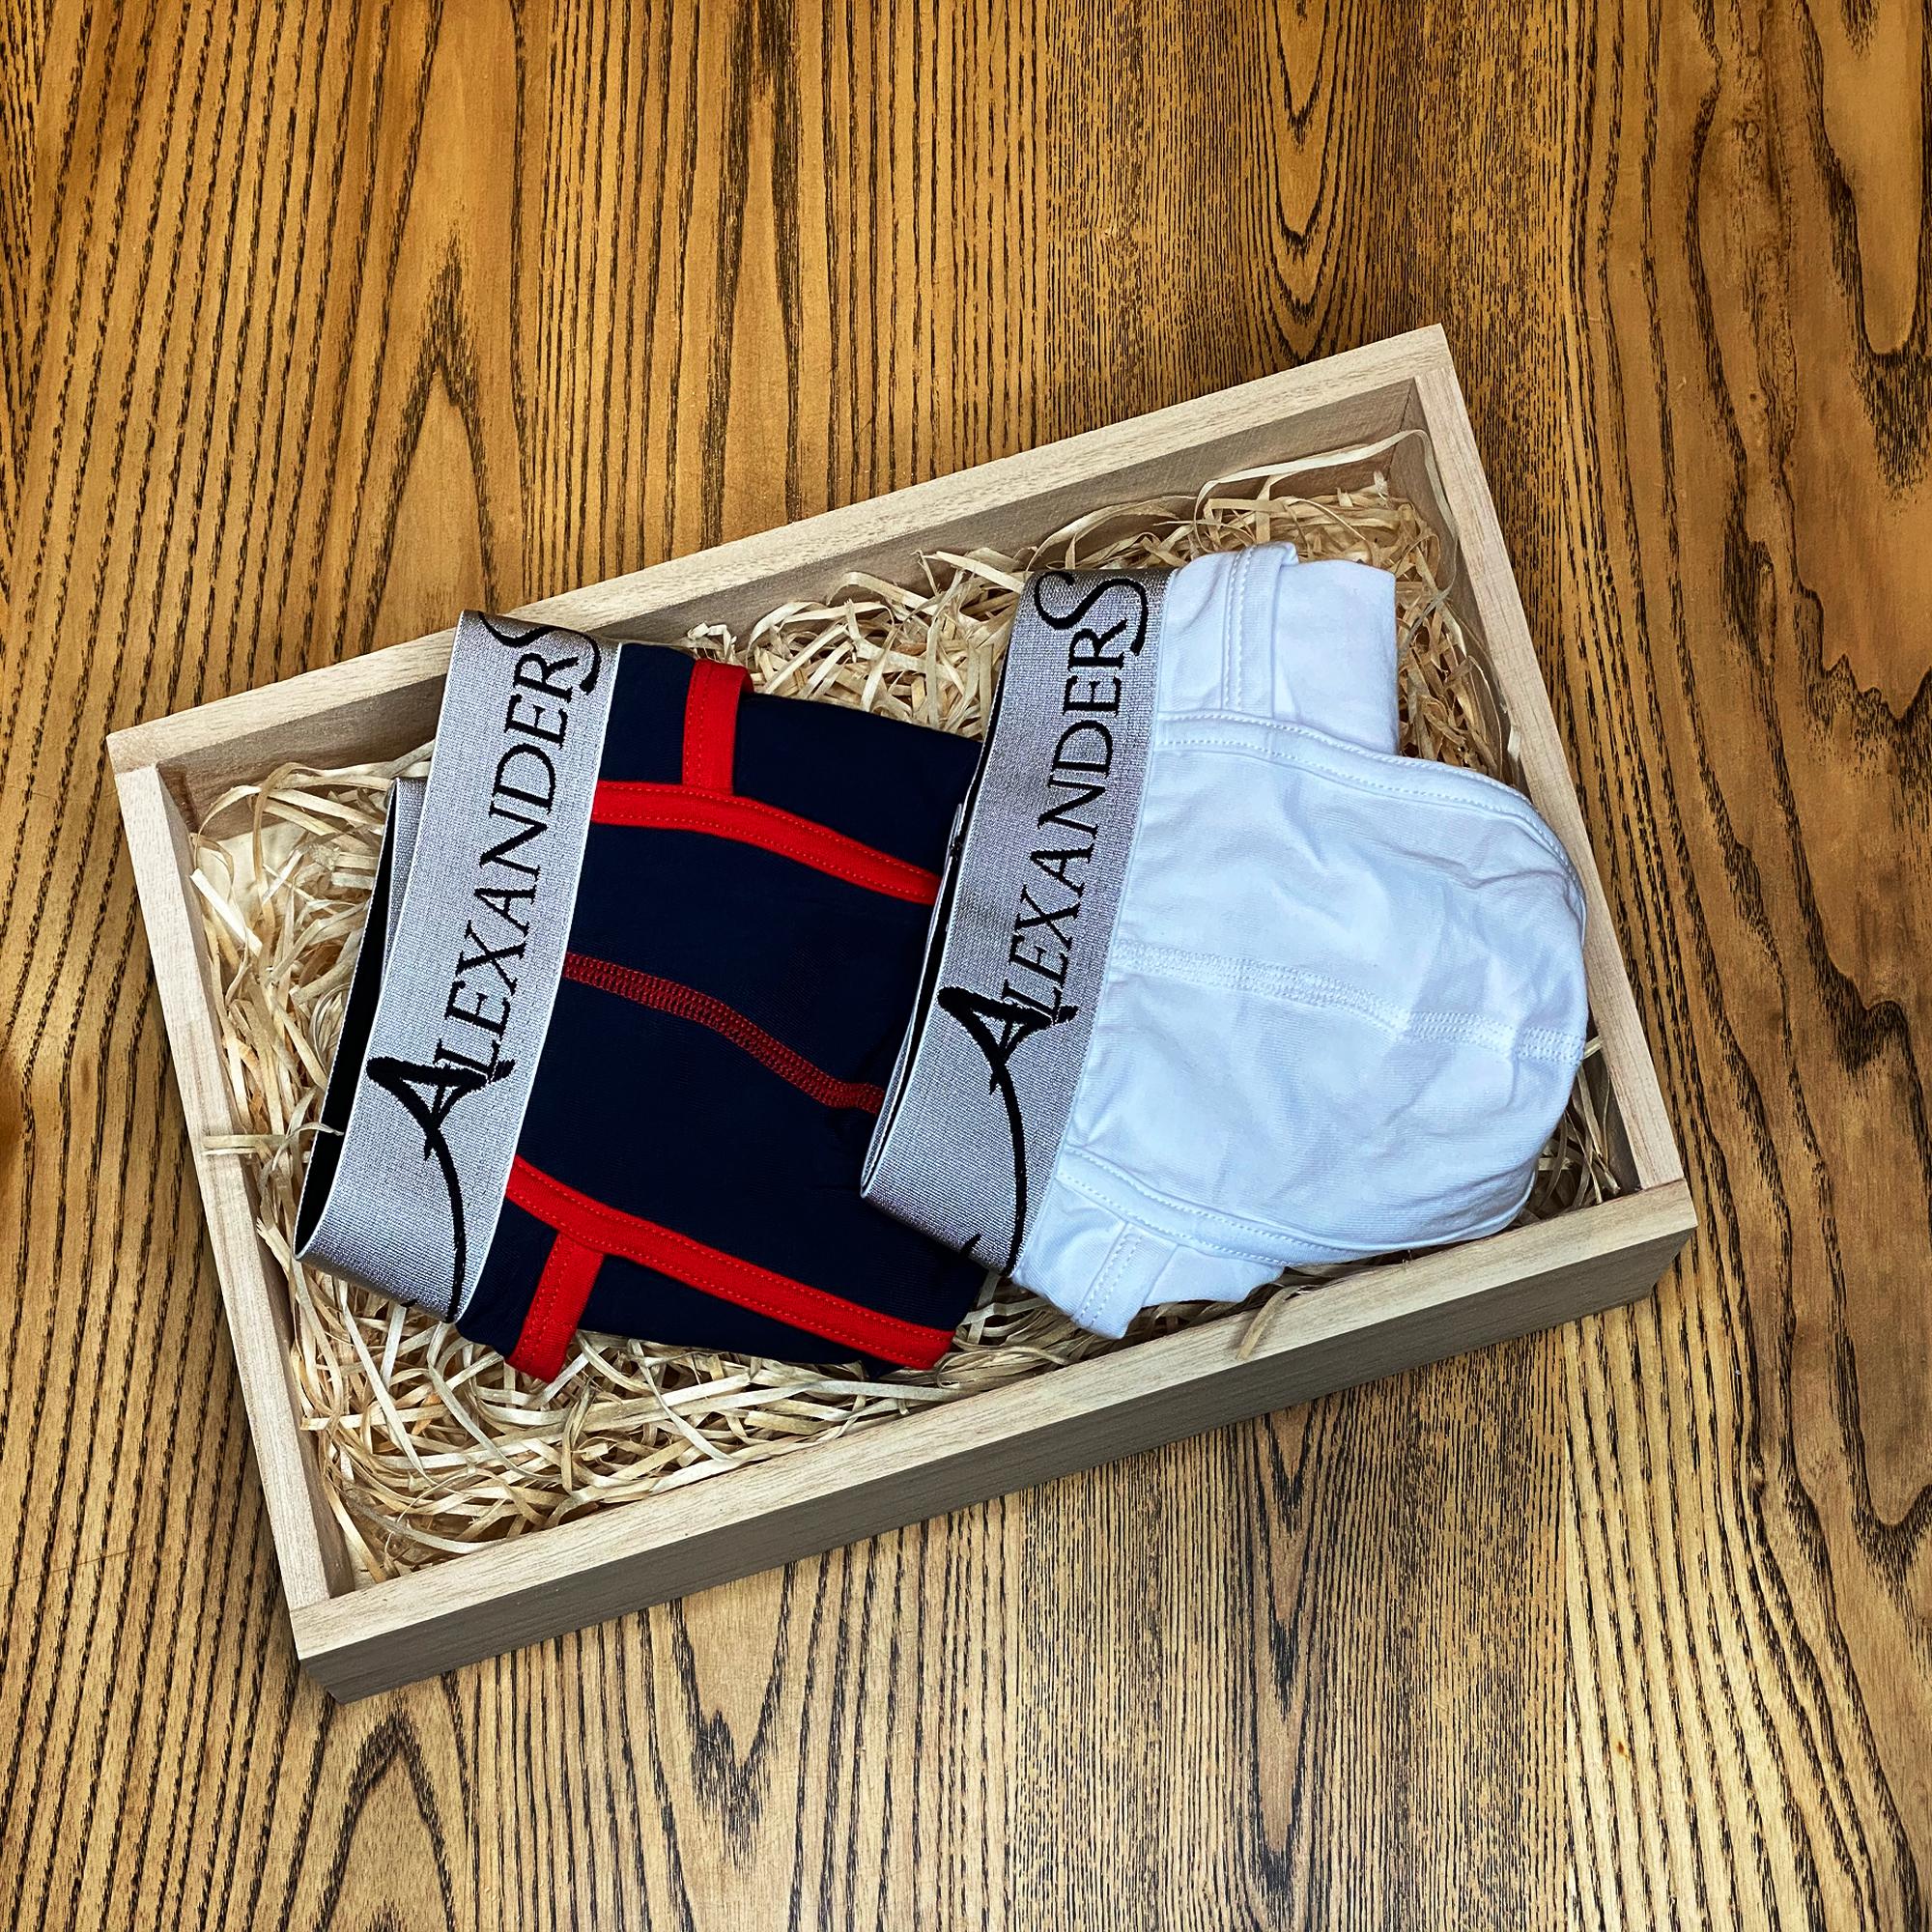 Pack of 2 everyday essentials. Shop men's underwear at AlexanderS for multipacks, hipsters, classic briefs, and more.